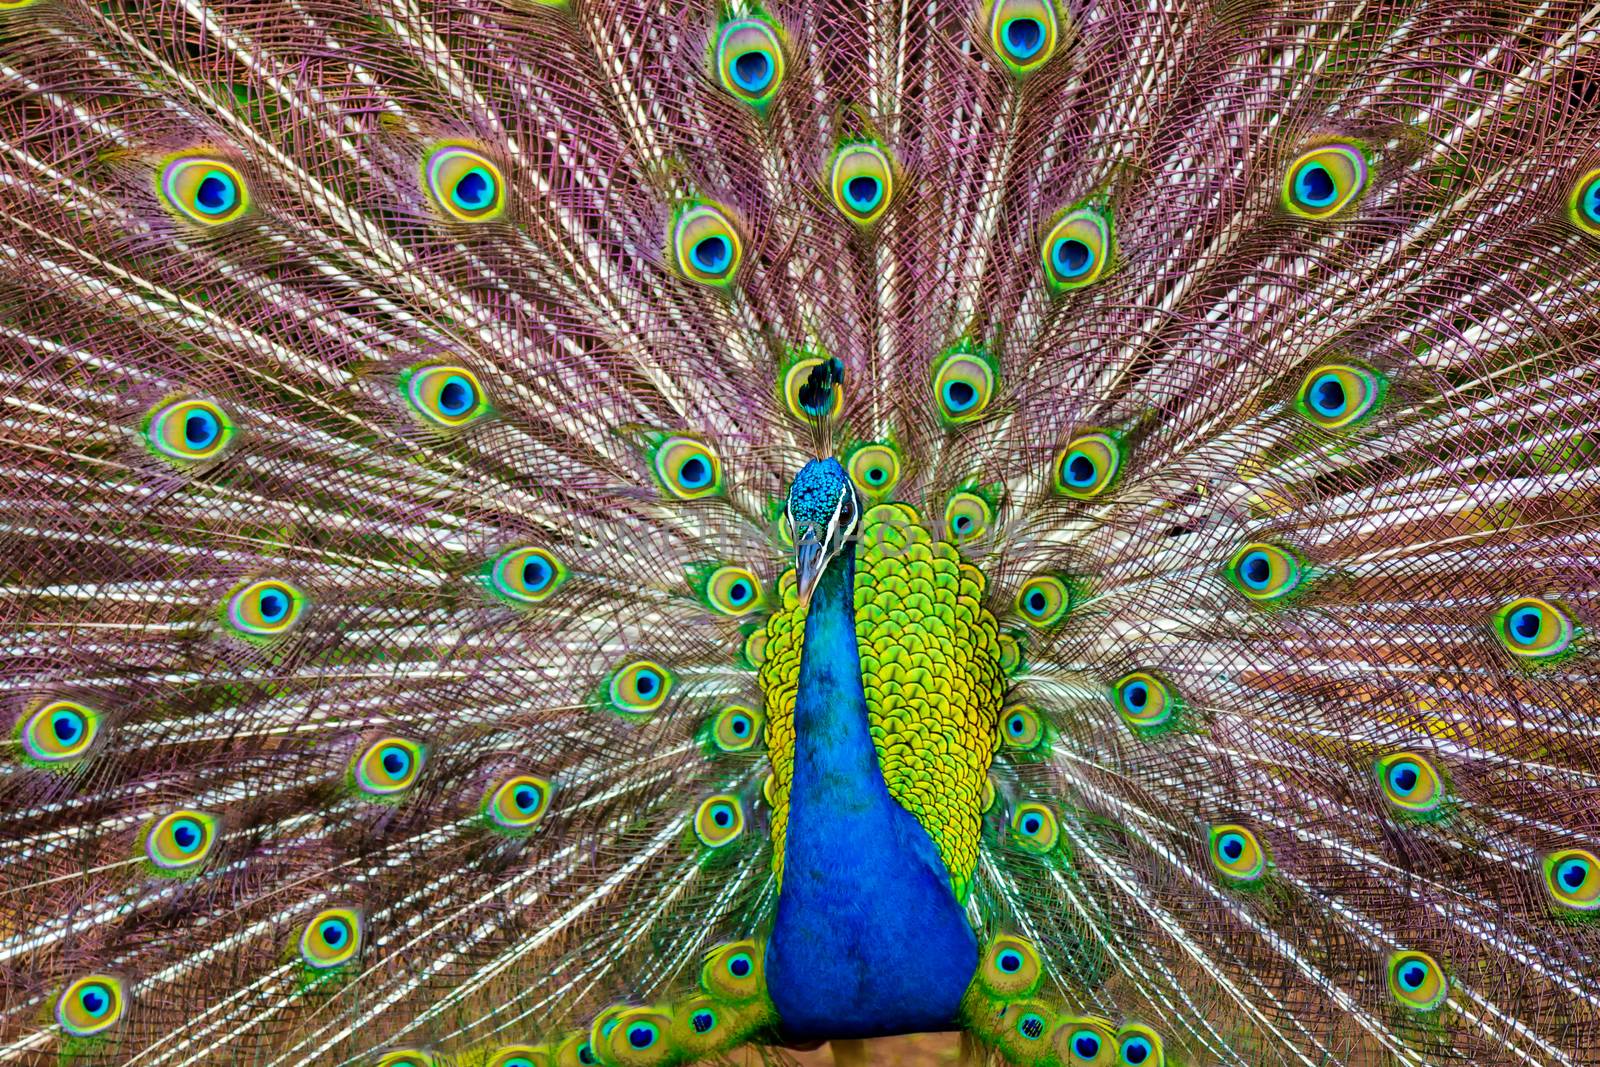 A Peacock Displaying Its Colorful Feathers in Kauai, Hawaii by backyard_photography